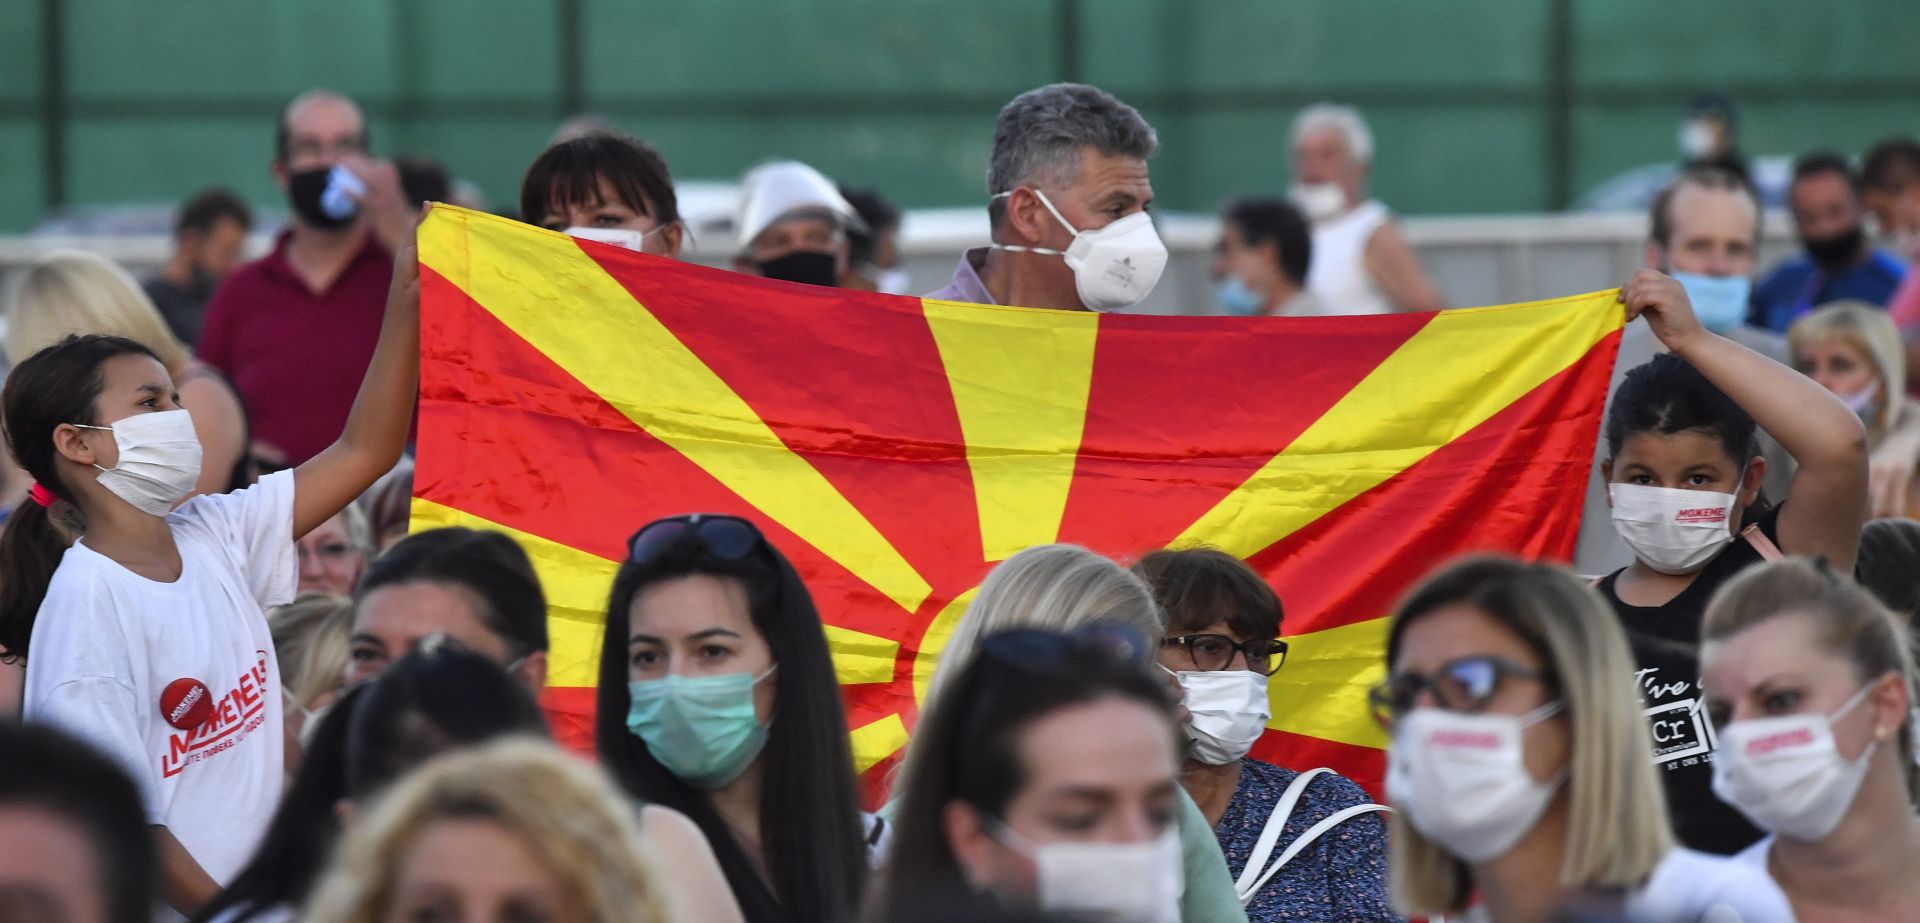 epa08539540 Supporters of the ruling SDSM party wearing protective face masks, attend the main election campaign rally in Skopje, Republic of North Macedonia, 10 July 2020. North Macedonia will hold elections on 15 July.  EPA/GEORGI LICOVSKI